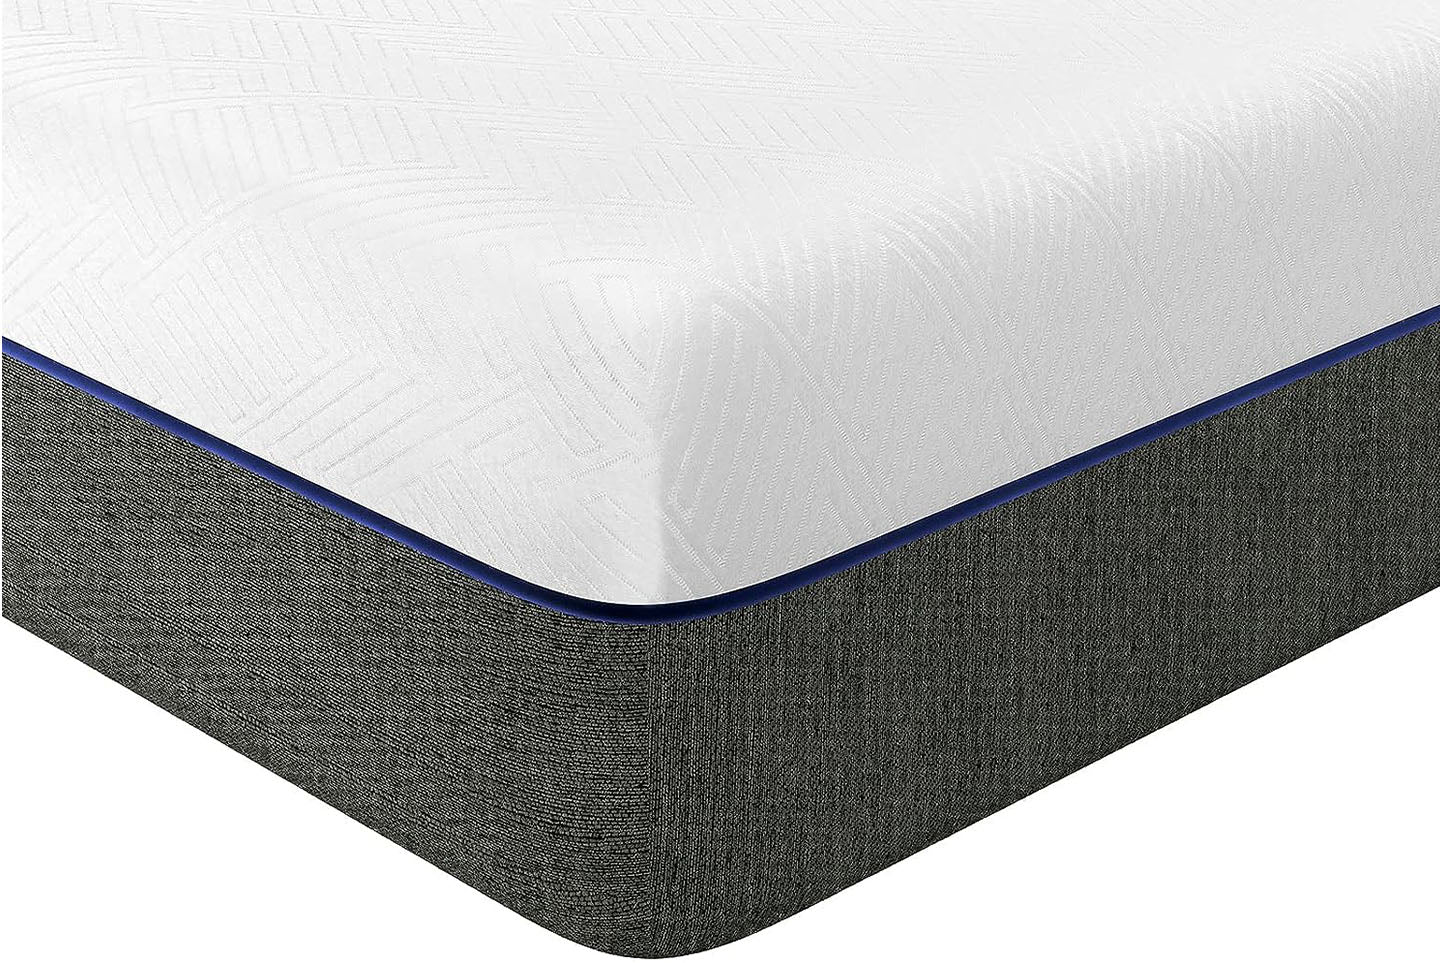 Memory Foam Mattress, Soft Fabric, Skin-friendly Mattress, Breathable Cover, 2 Layer for More Supportive 3FT Single (90x190x20cm)